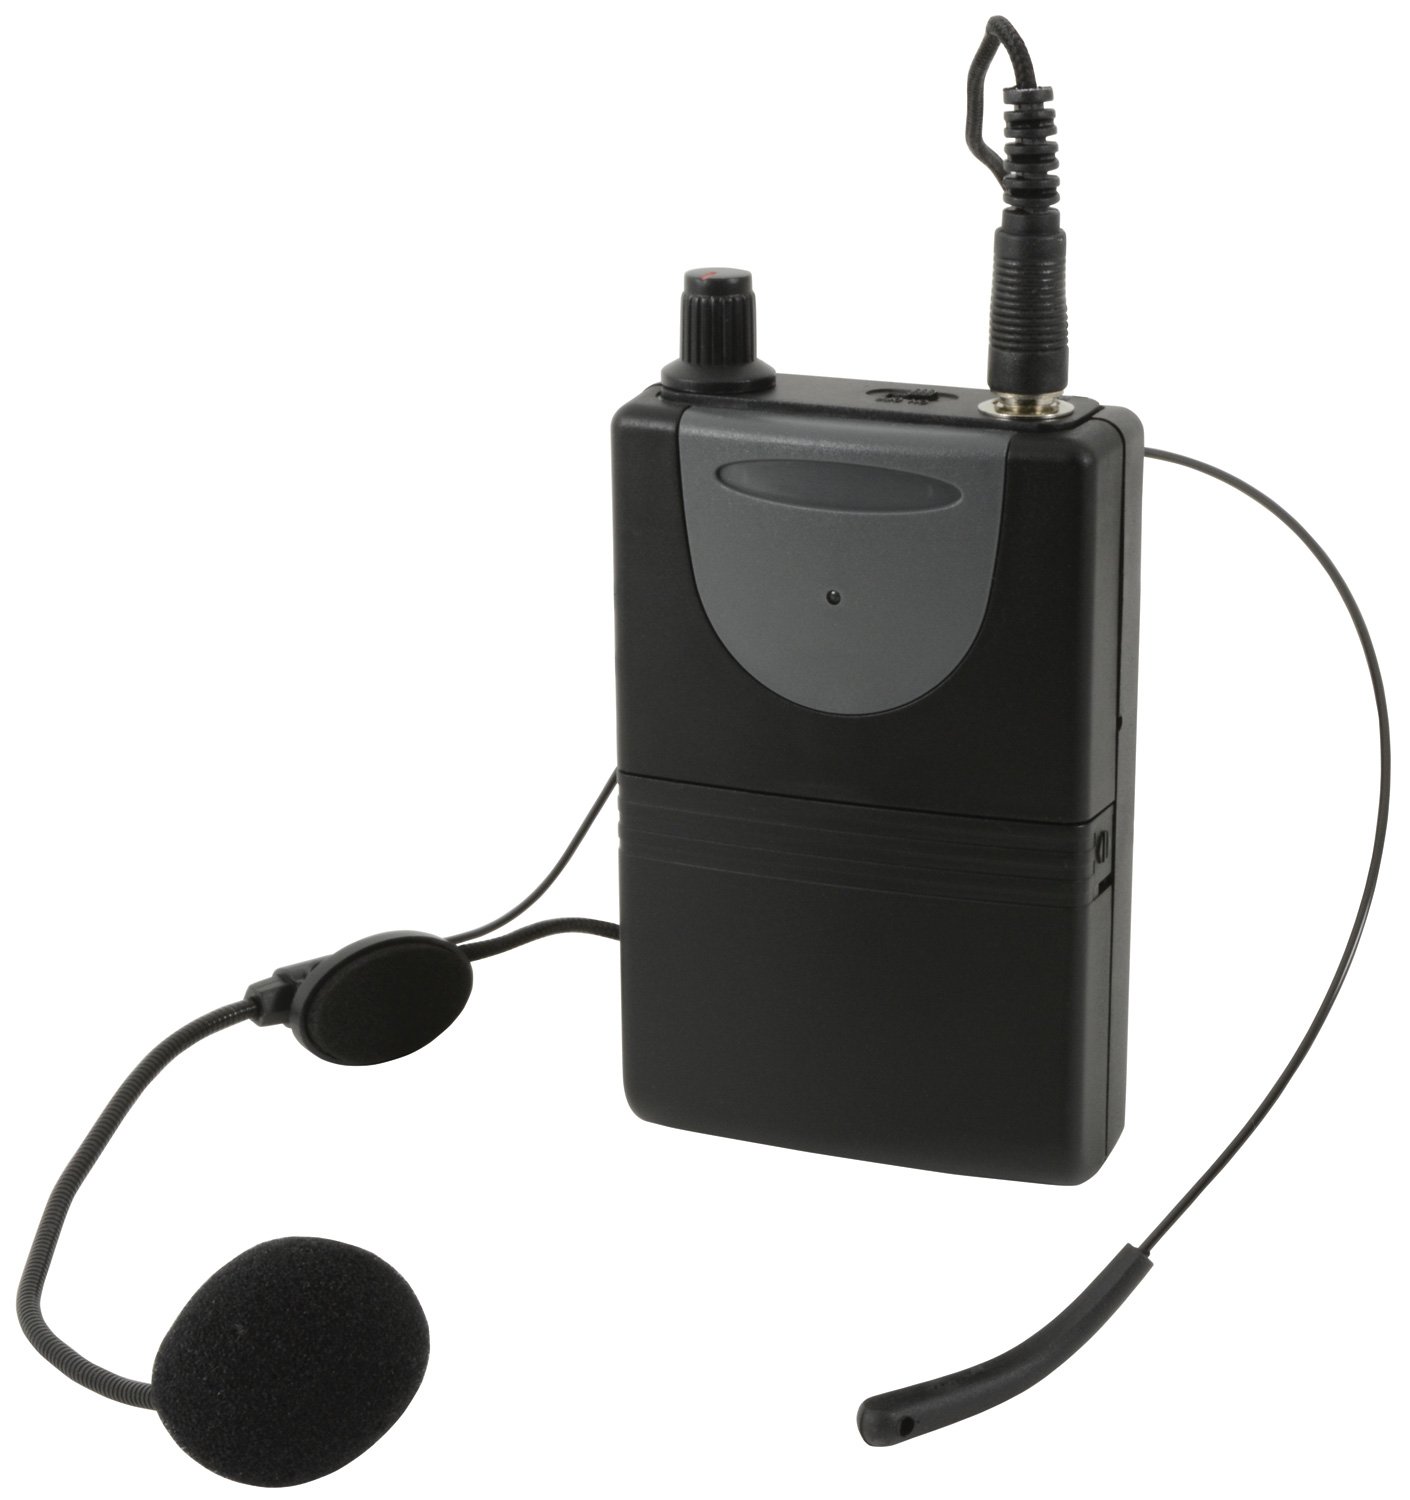 Neckband Mic + Beltpack for QRPA & QXPA Headset for QXPA-plus 863.8MHz